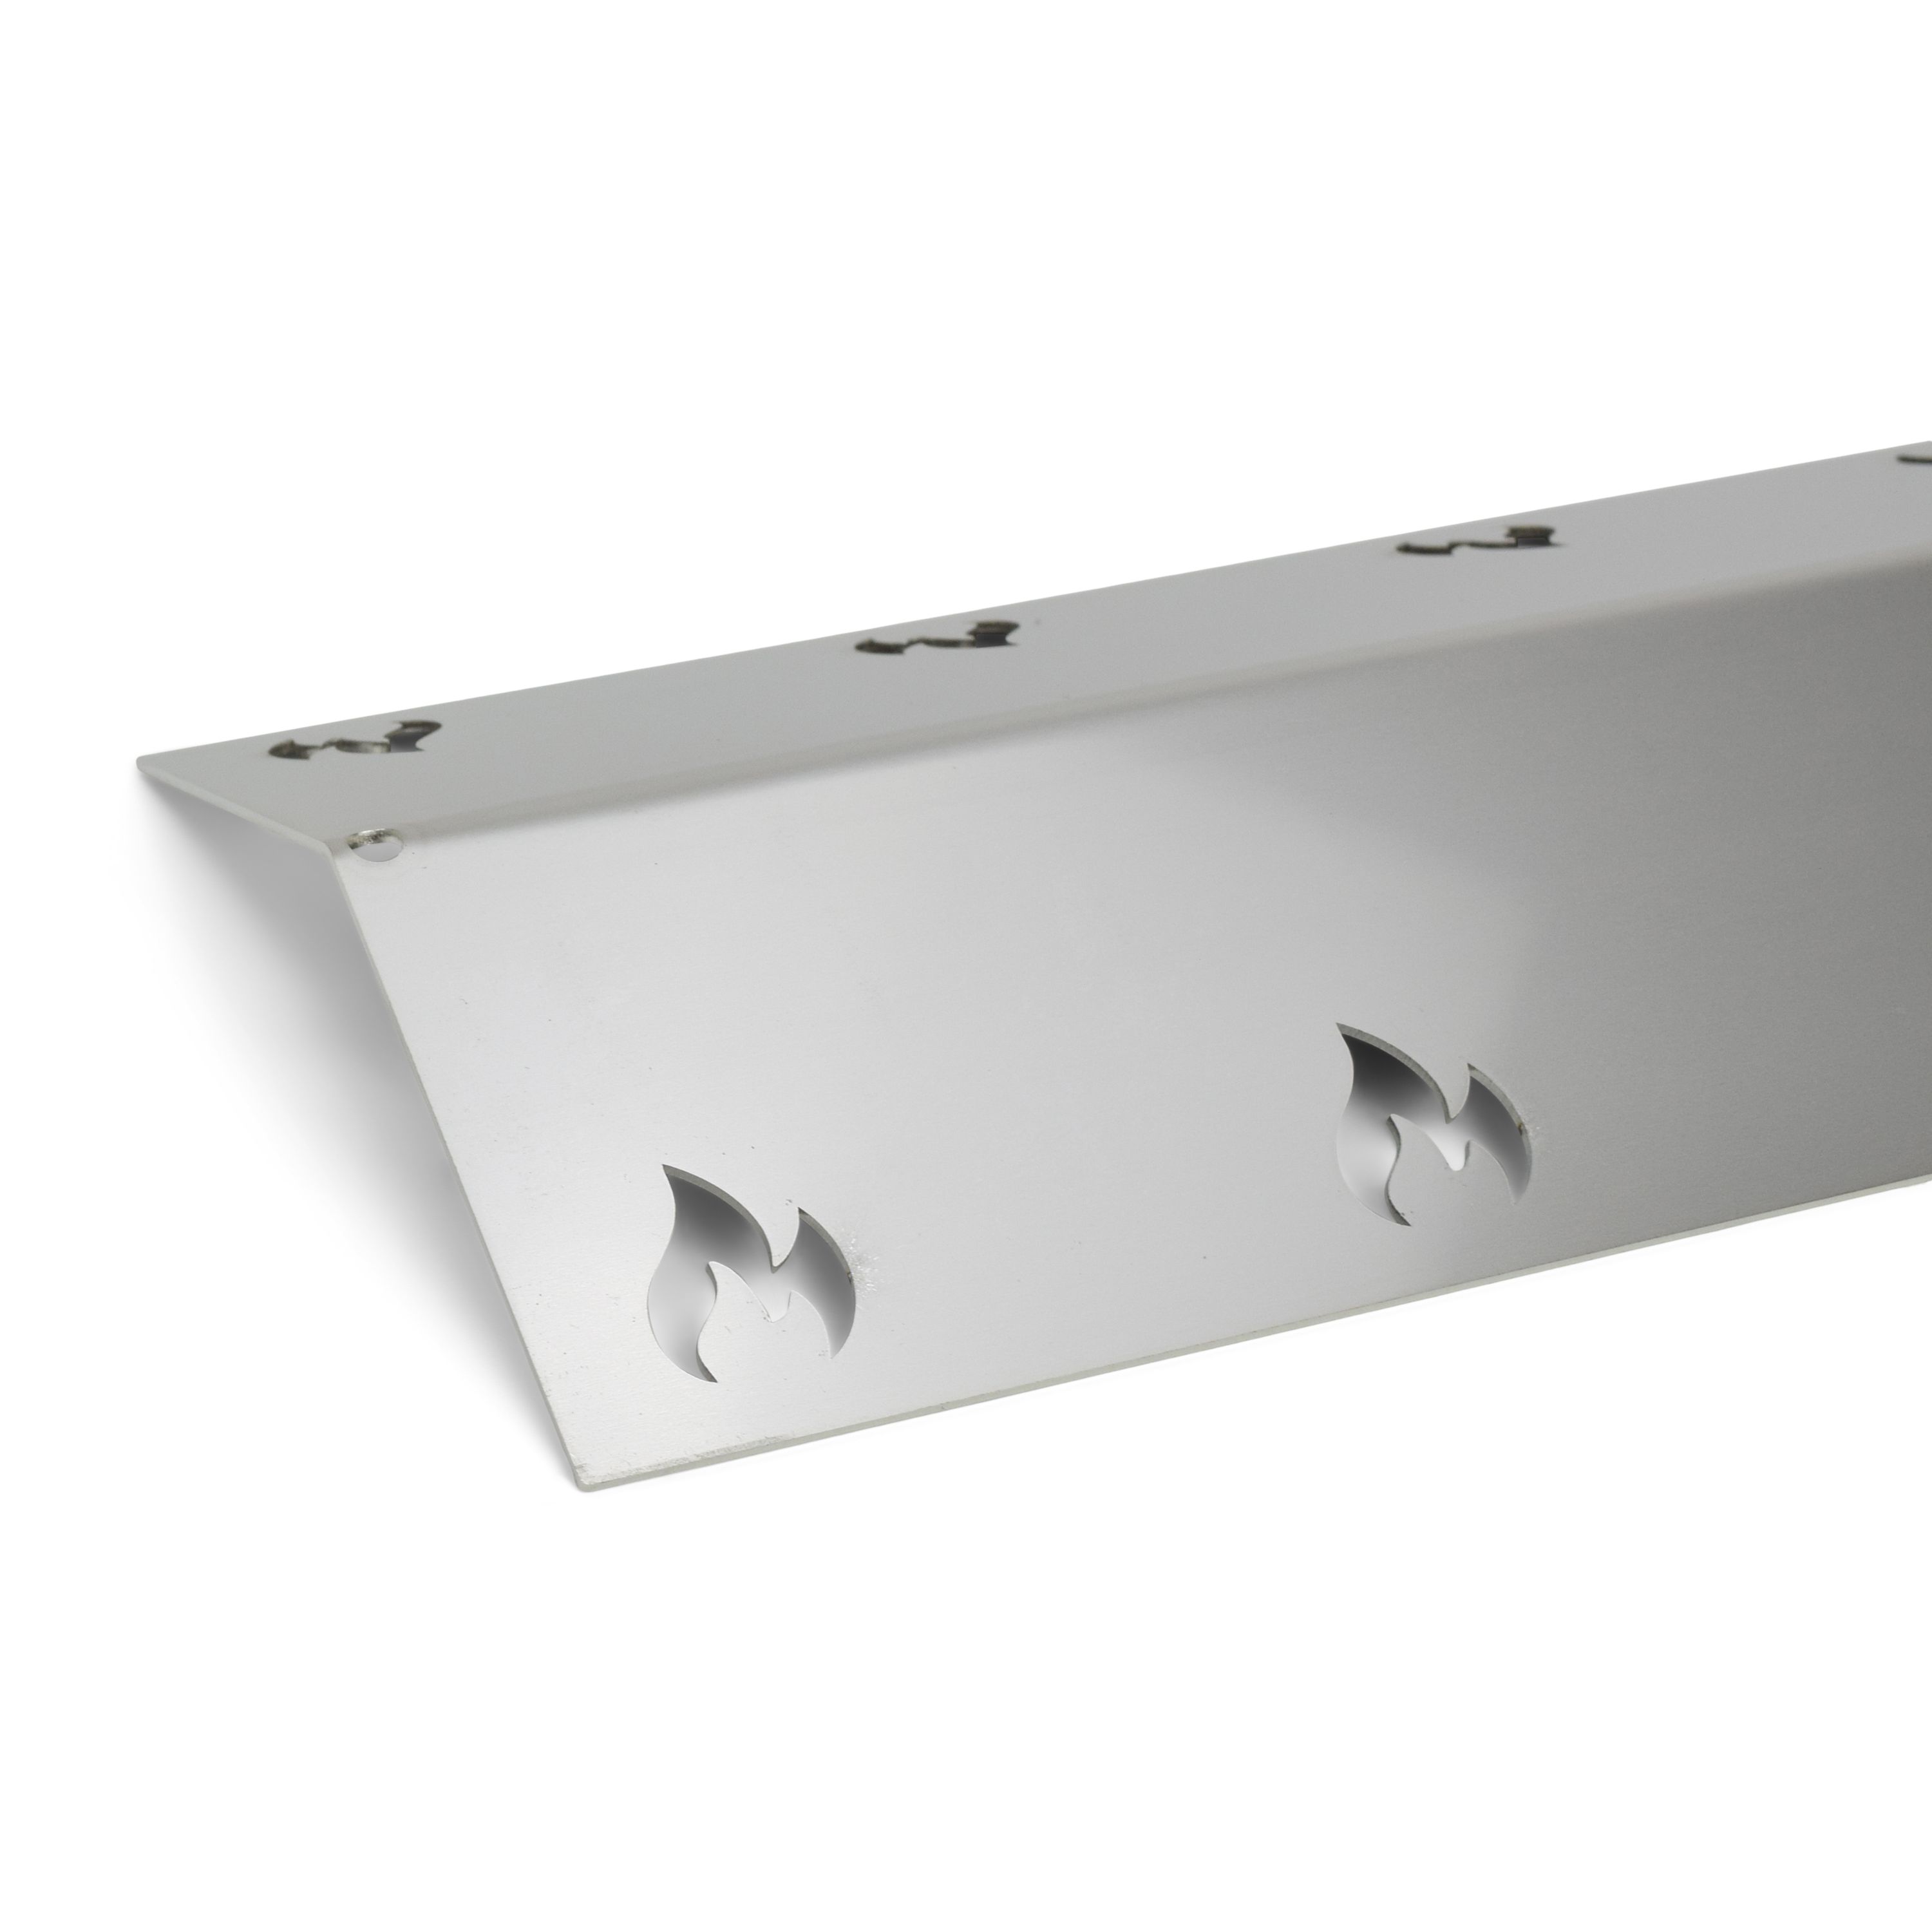 Stainless steel burner cover 41 x 14 cm Replacement aroma rail outlives your barbecue